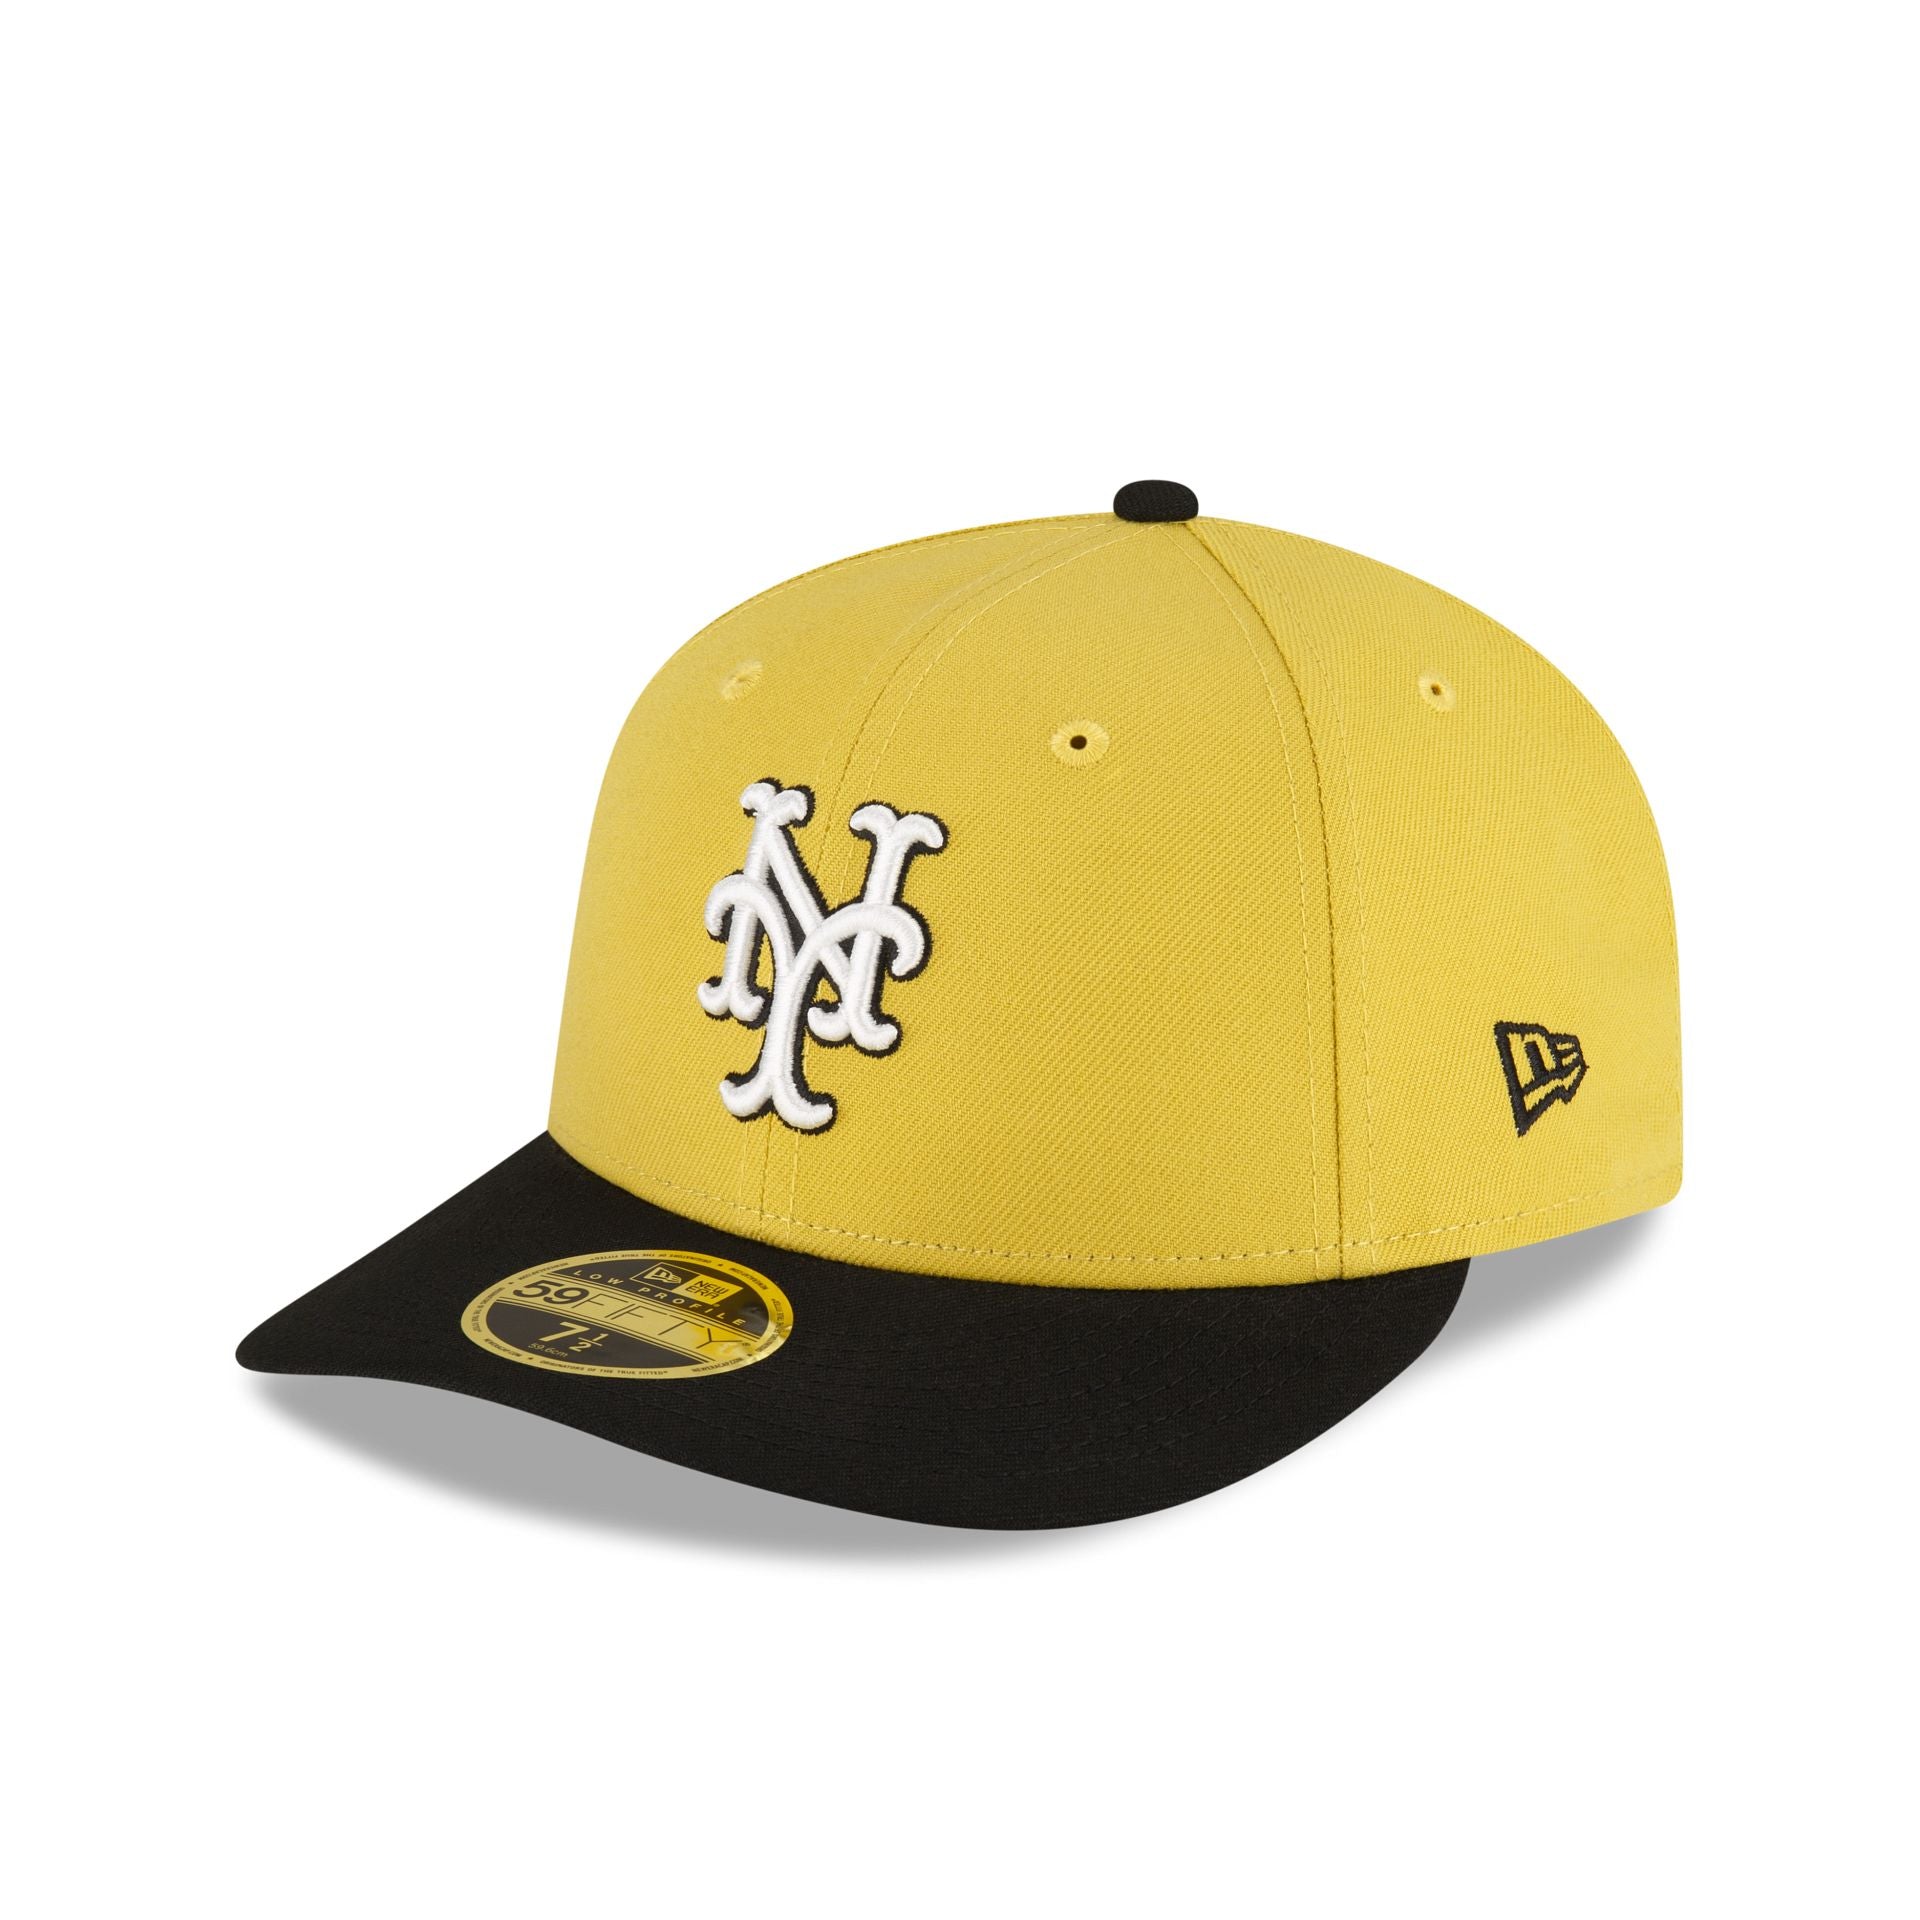 Official Low Crown 59Fifty Hats, New Era Low Crown Caps, Low Crown